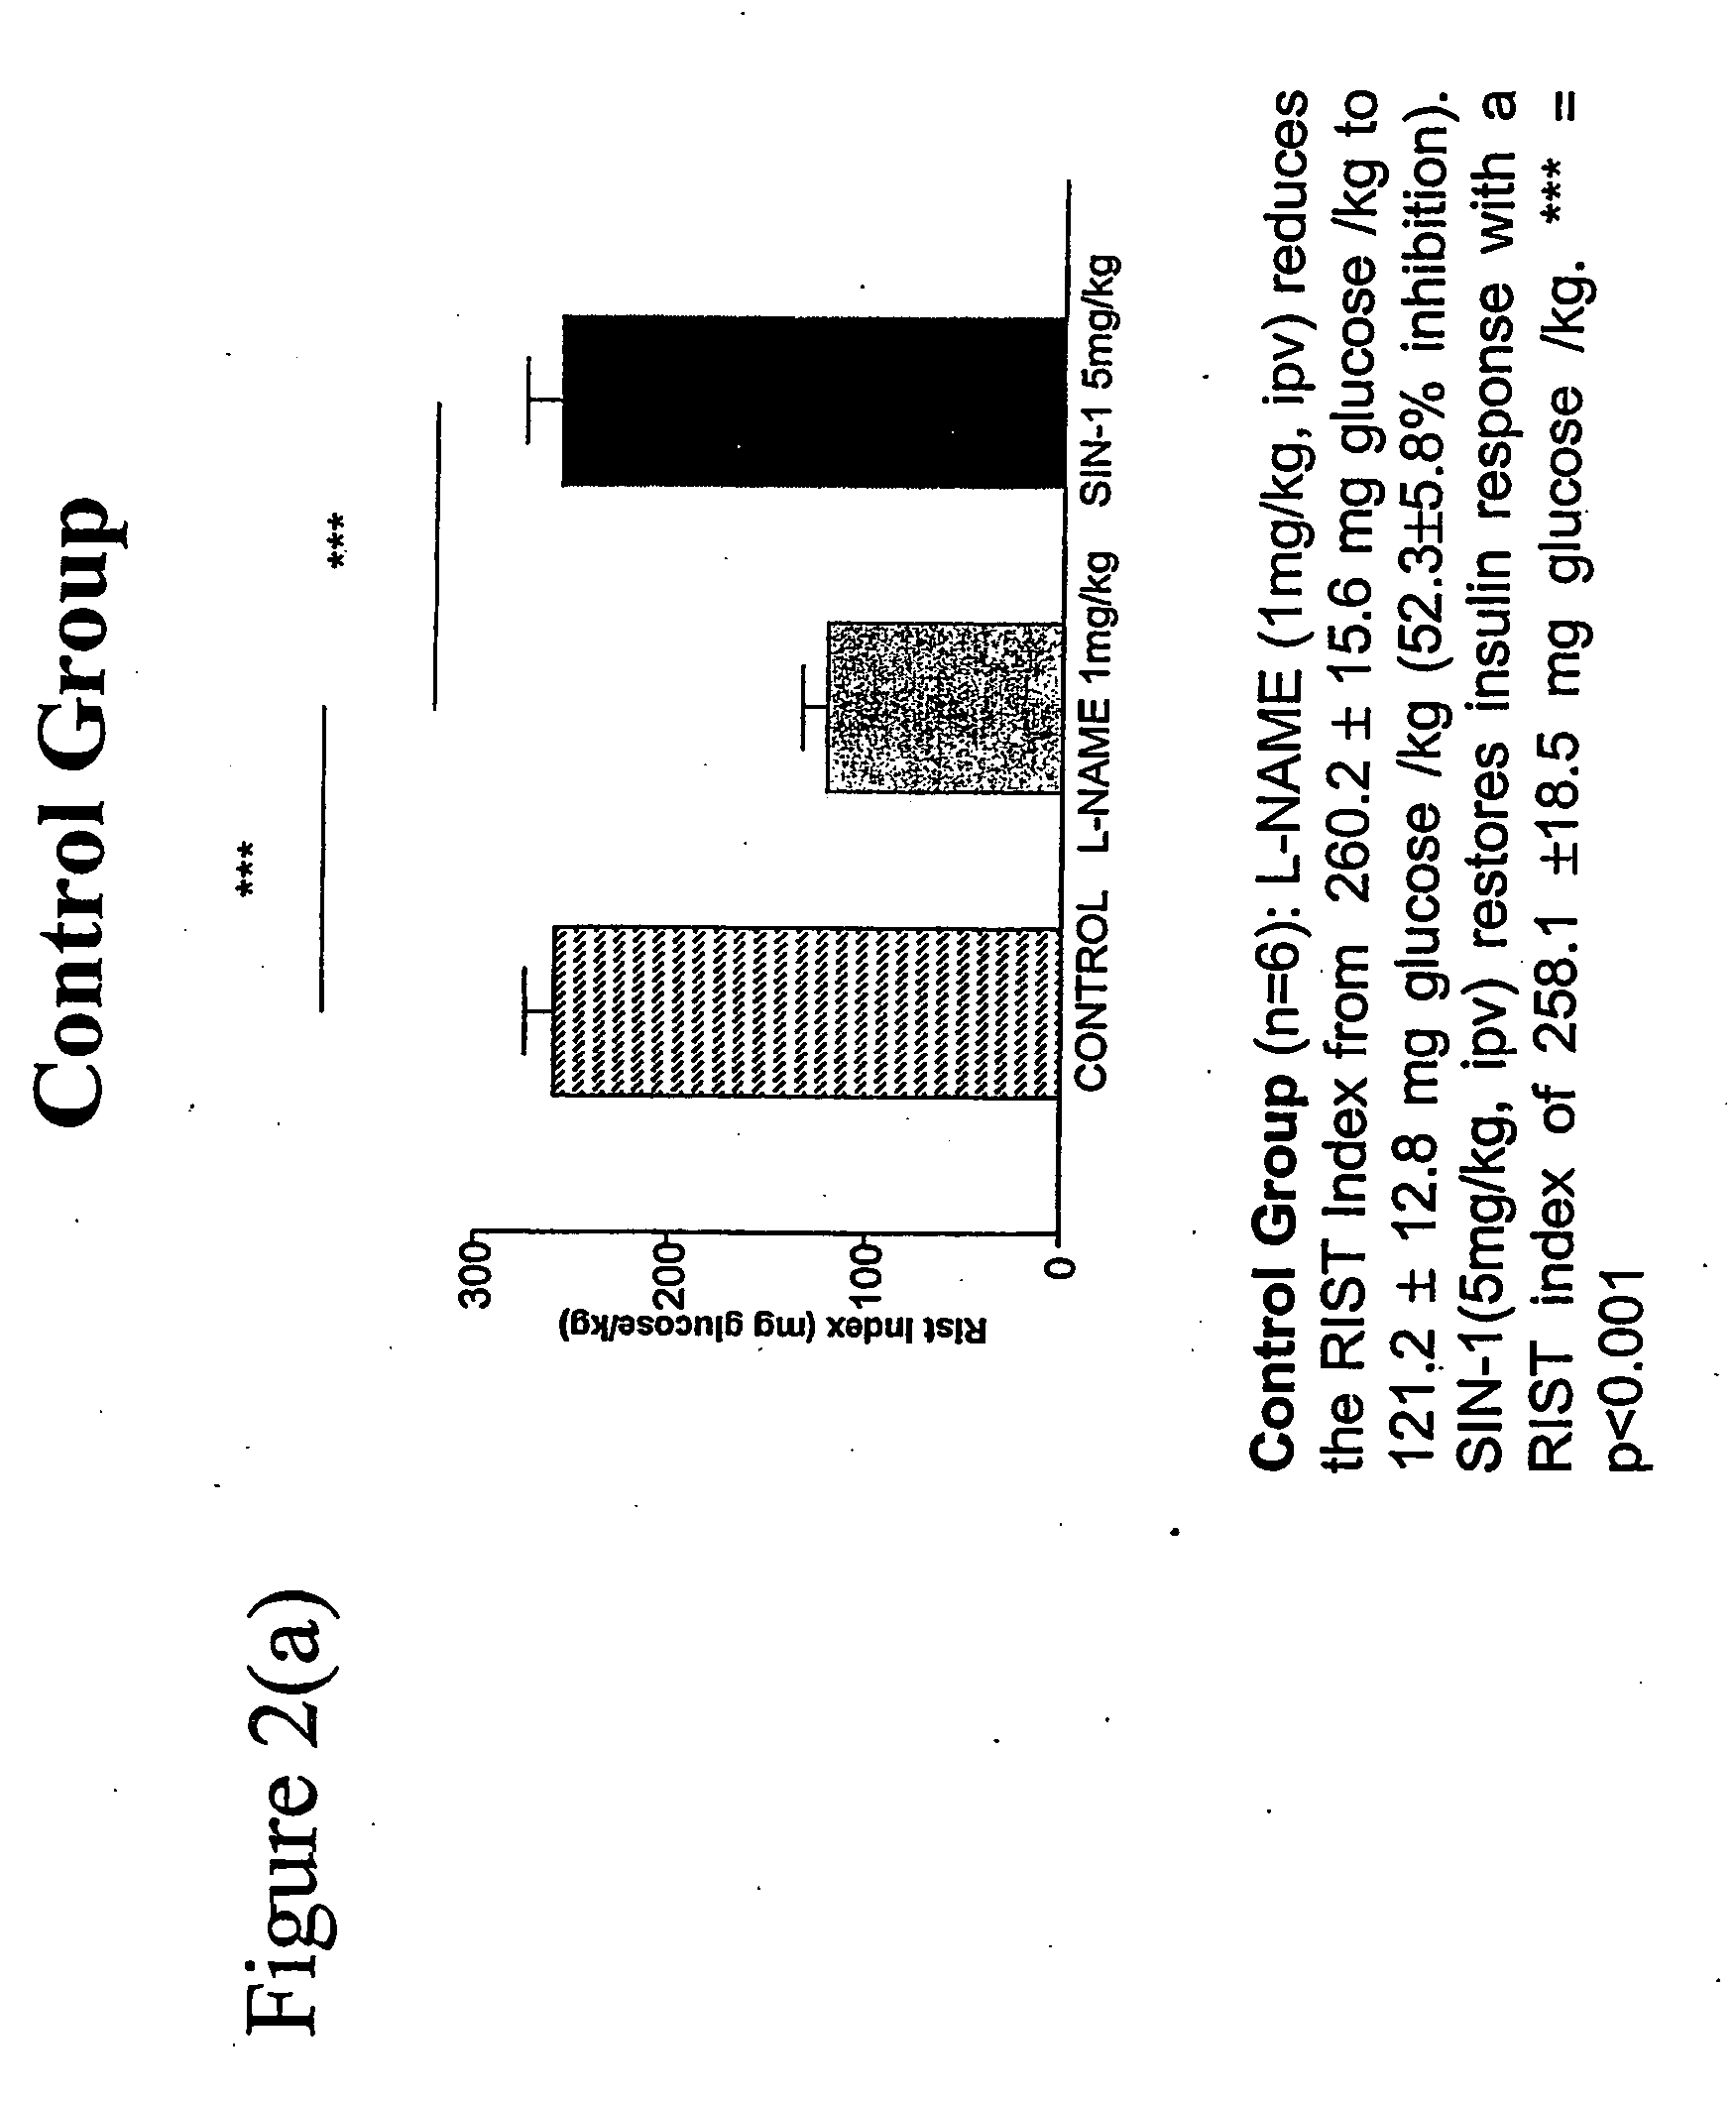 Use of glutathione synthesis stimulating compounds in reducing insulin resistance